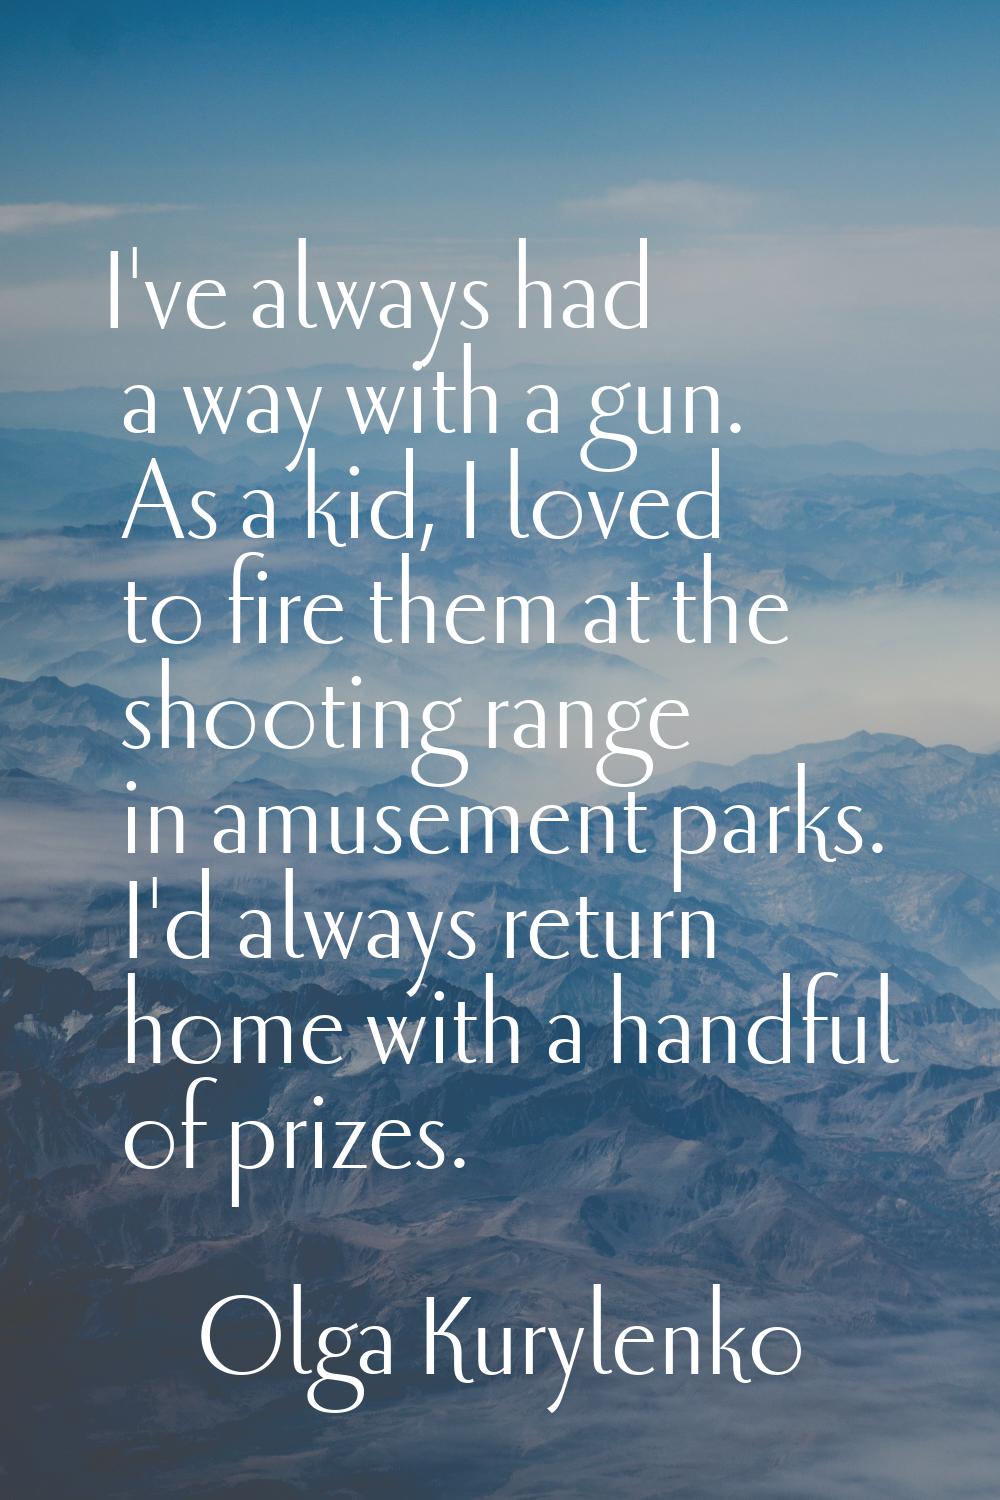 I've always had a way with a gun. As a kid, I loved to fire them at the shooting range in amusement